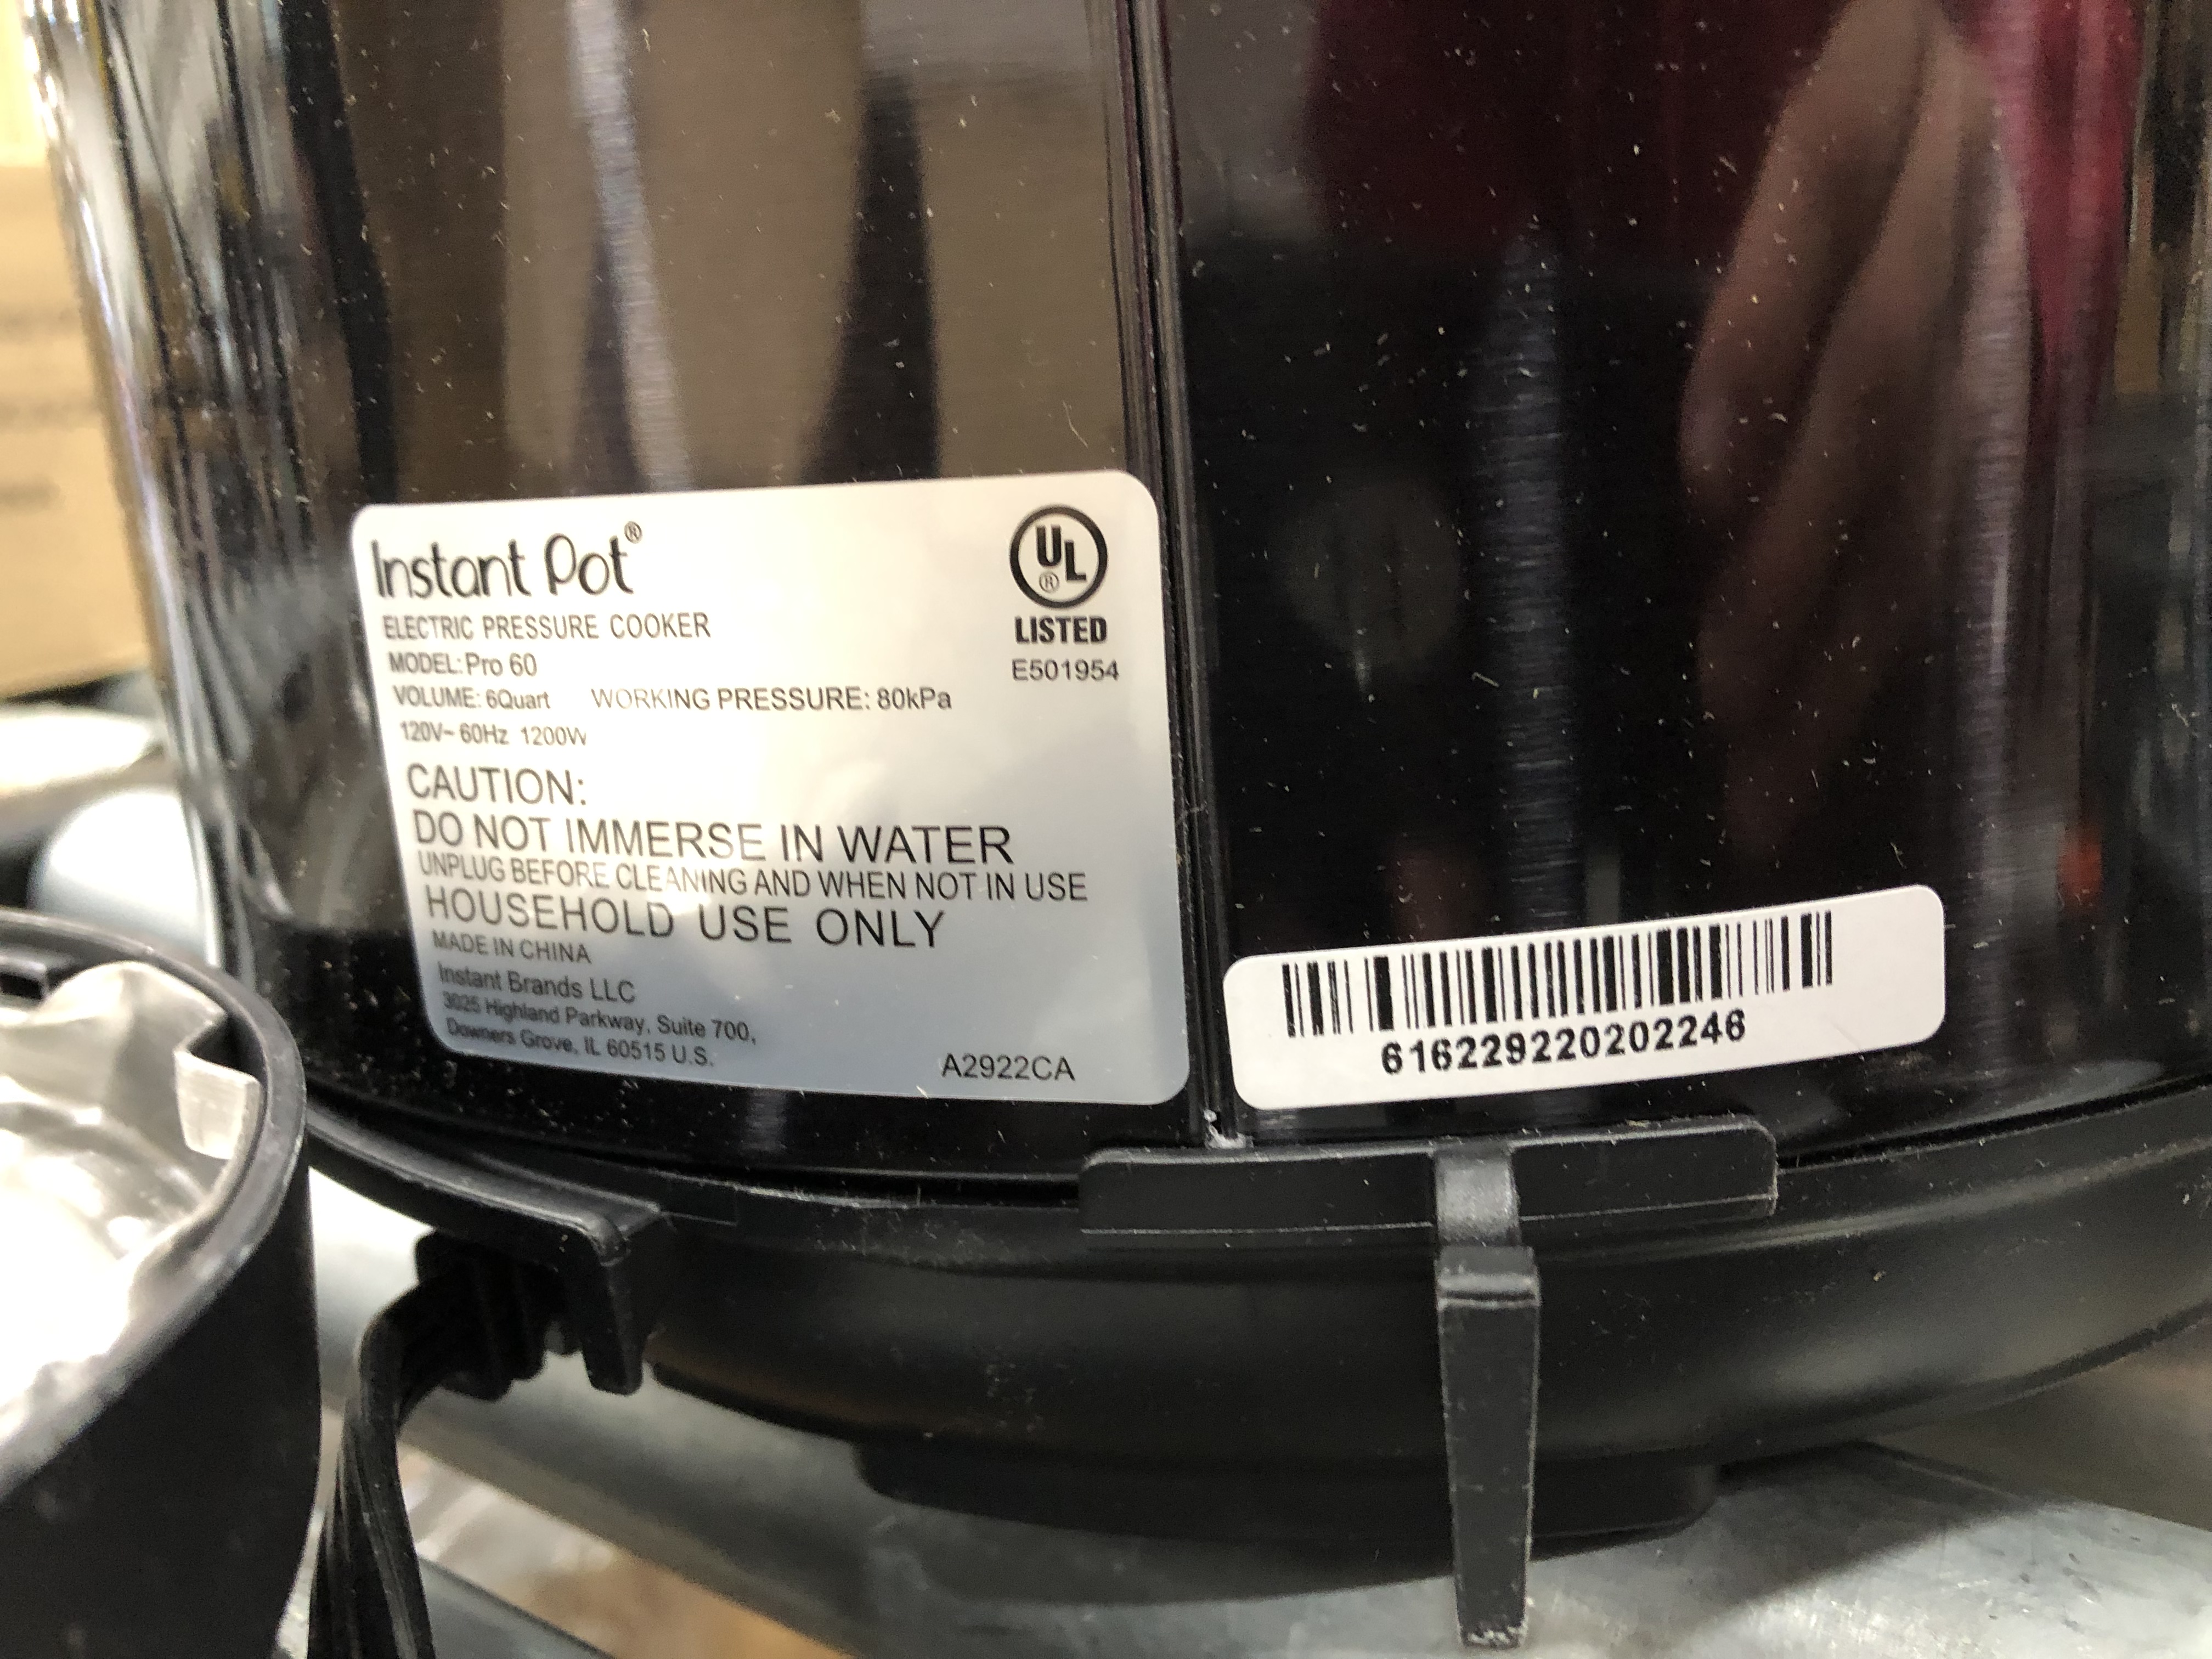 Photo 5 of (CRACKED LOWER SIDE )Instant Pot 6-Qt. Pro Pressure Cooker